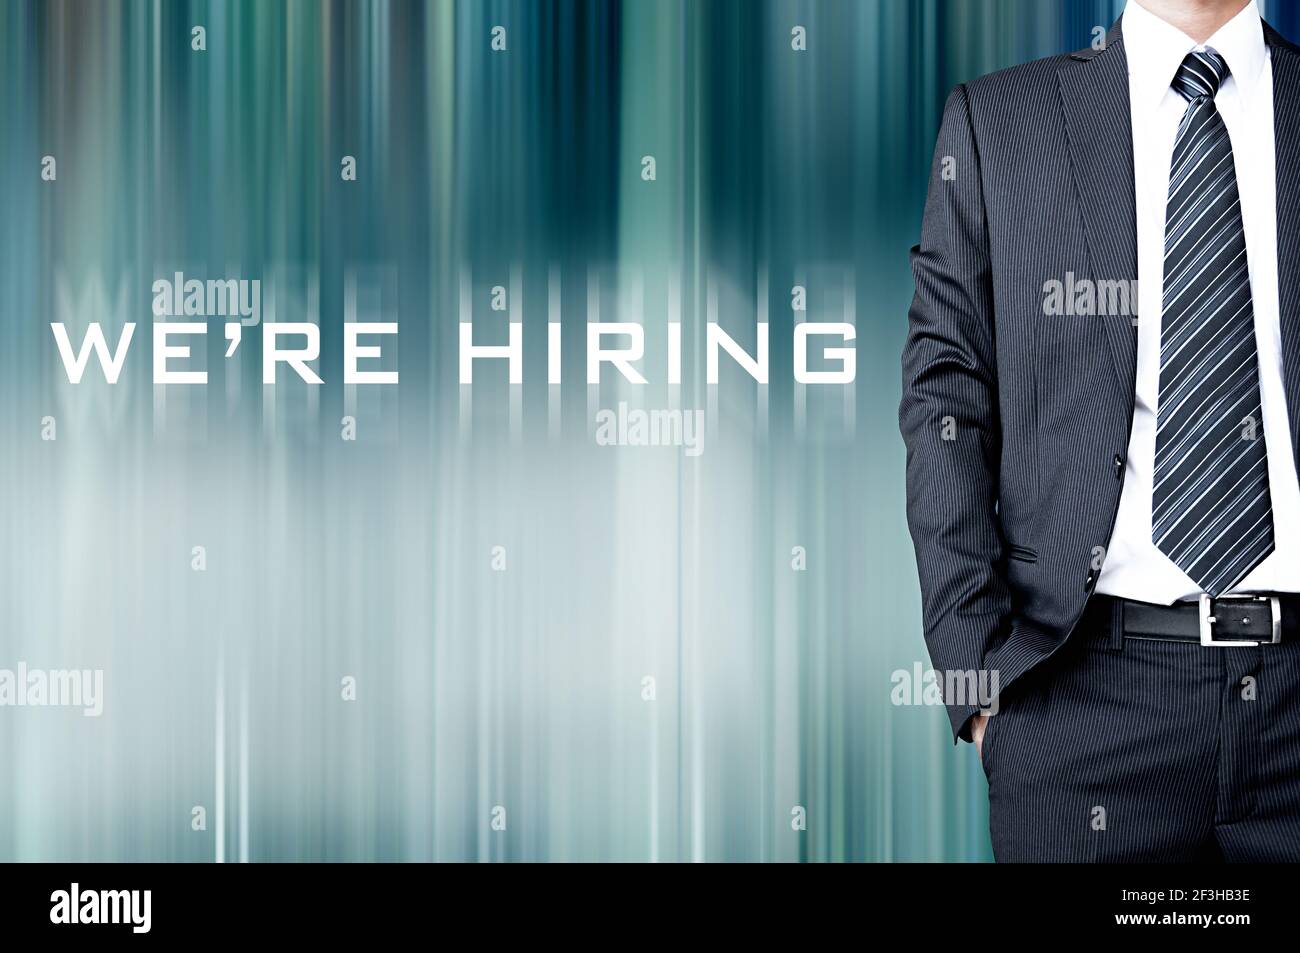 WE'RE HIRING sign on blur background with standing businessman Stock Photo